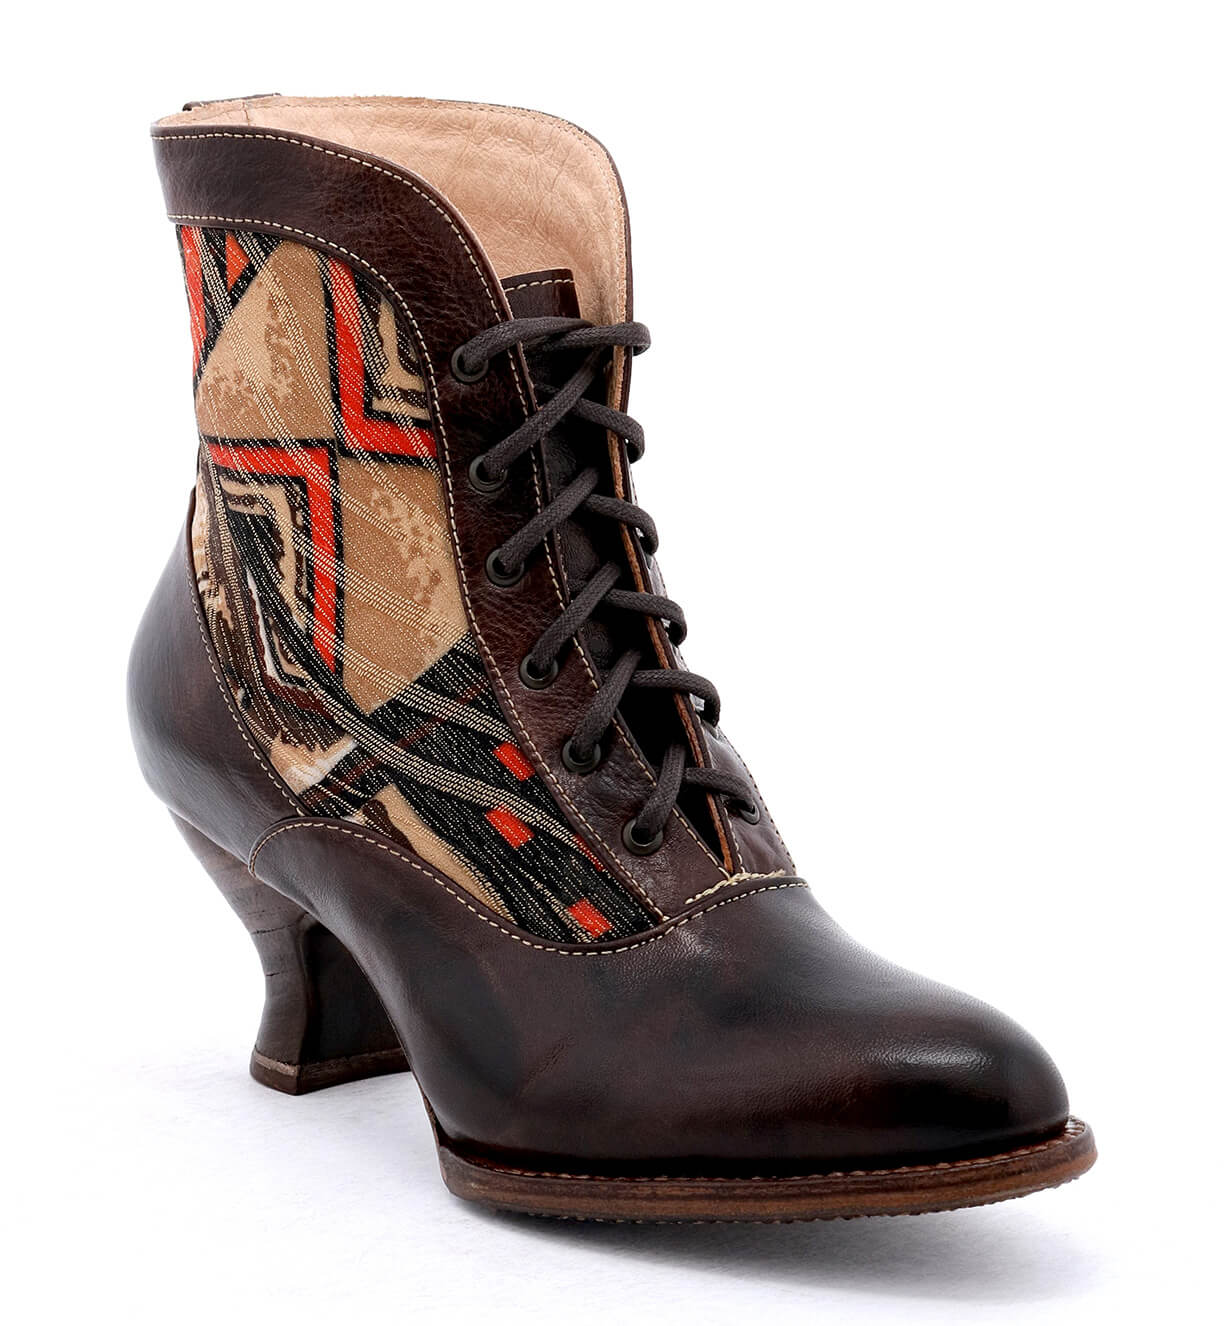 Jacquelyn Lace Up Leather Boots in Brown Rustic